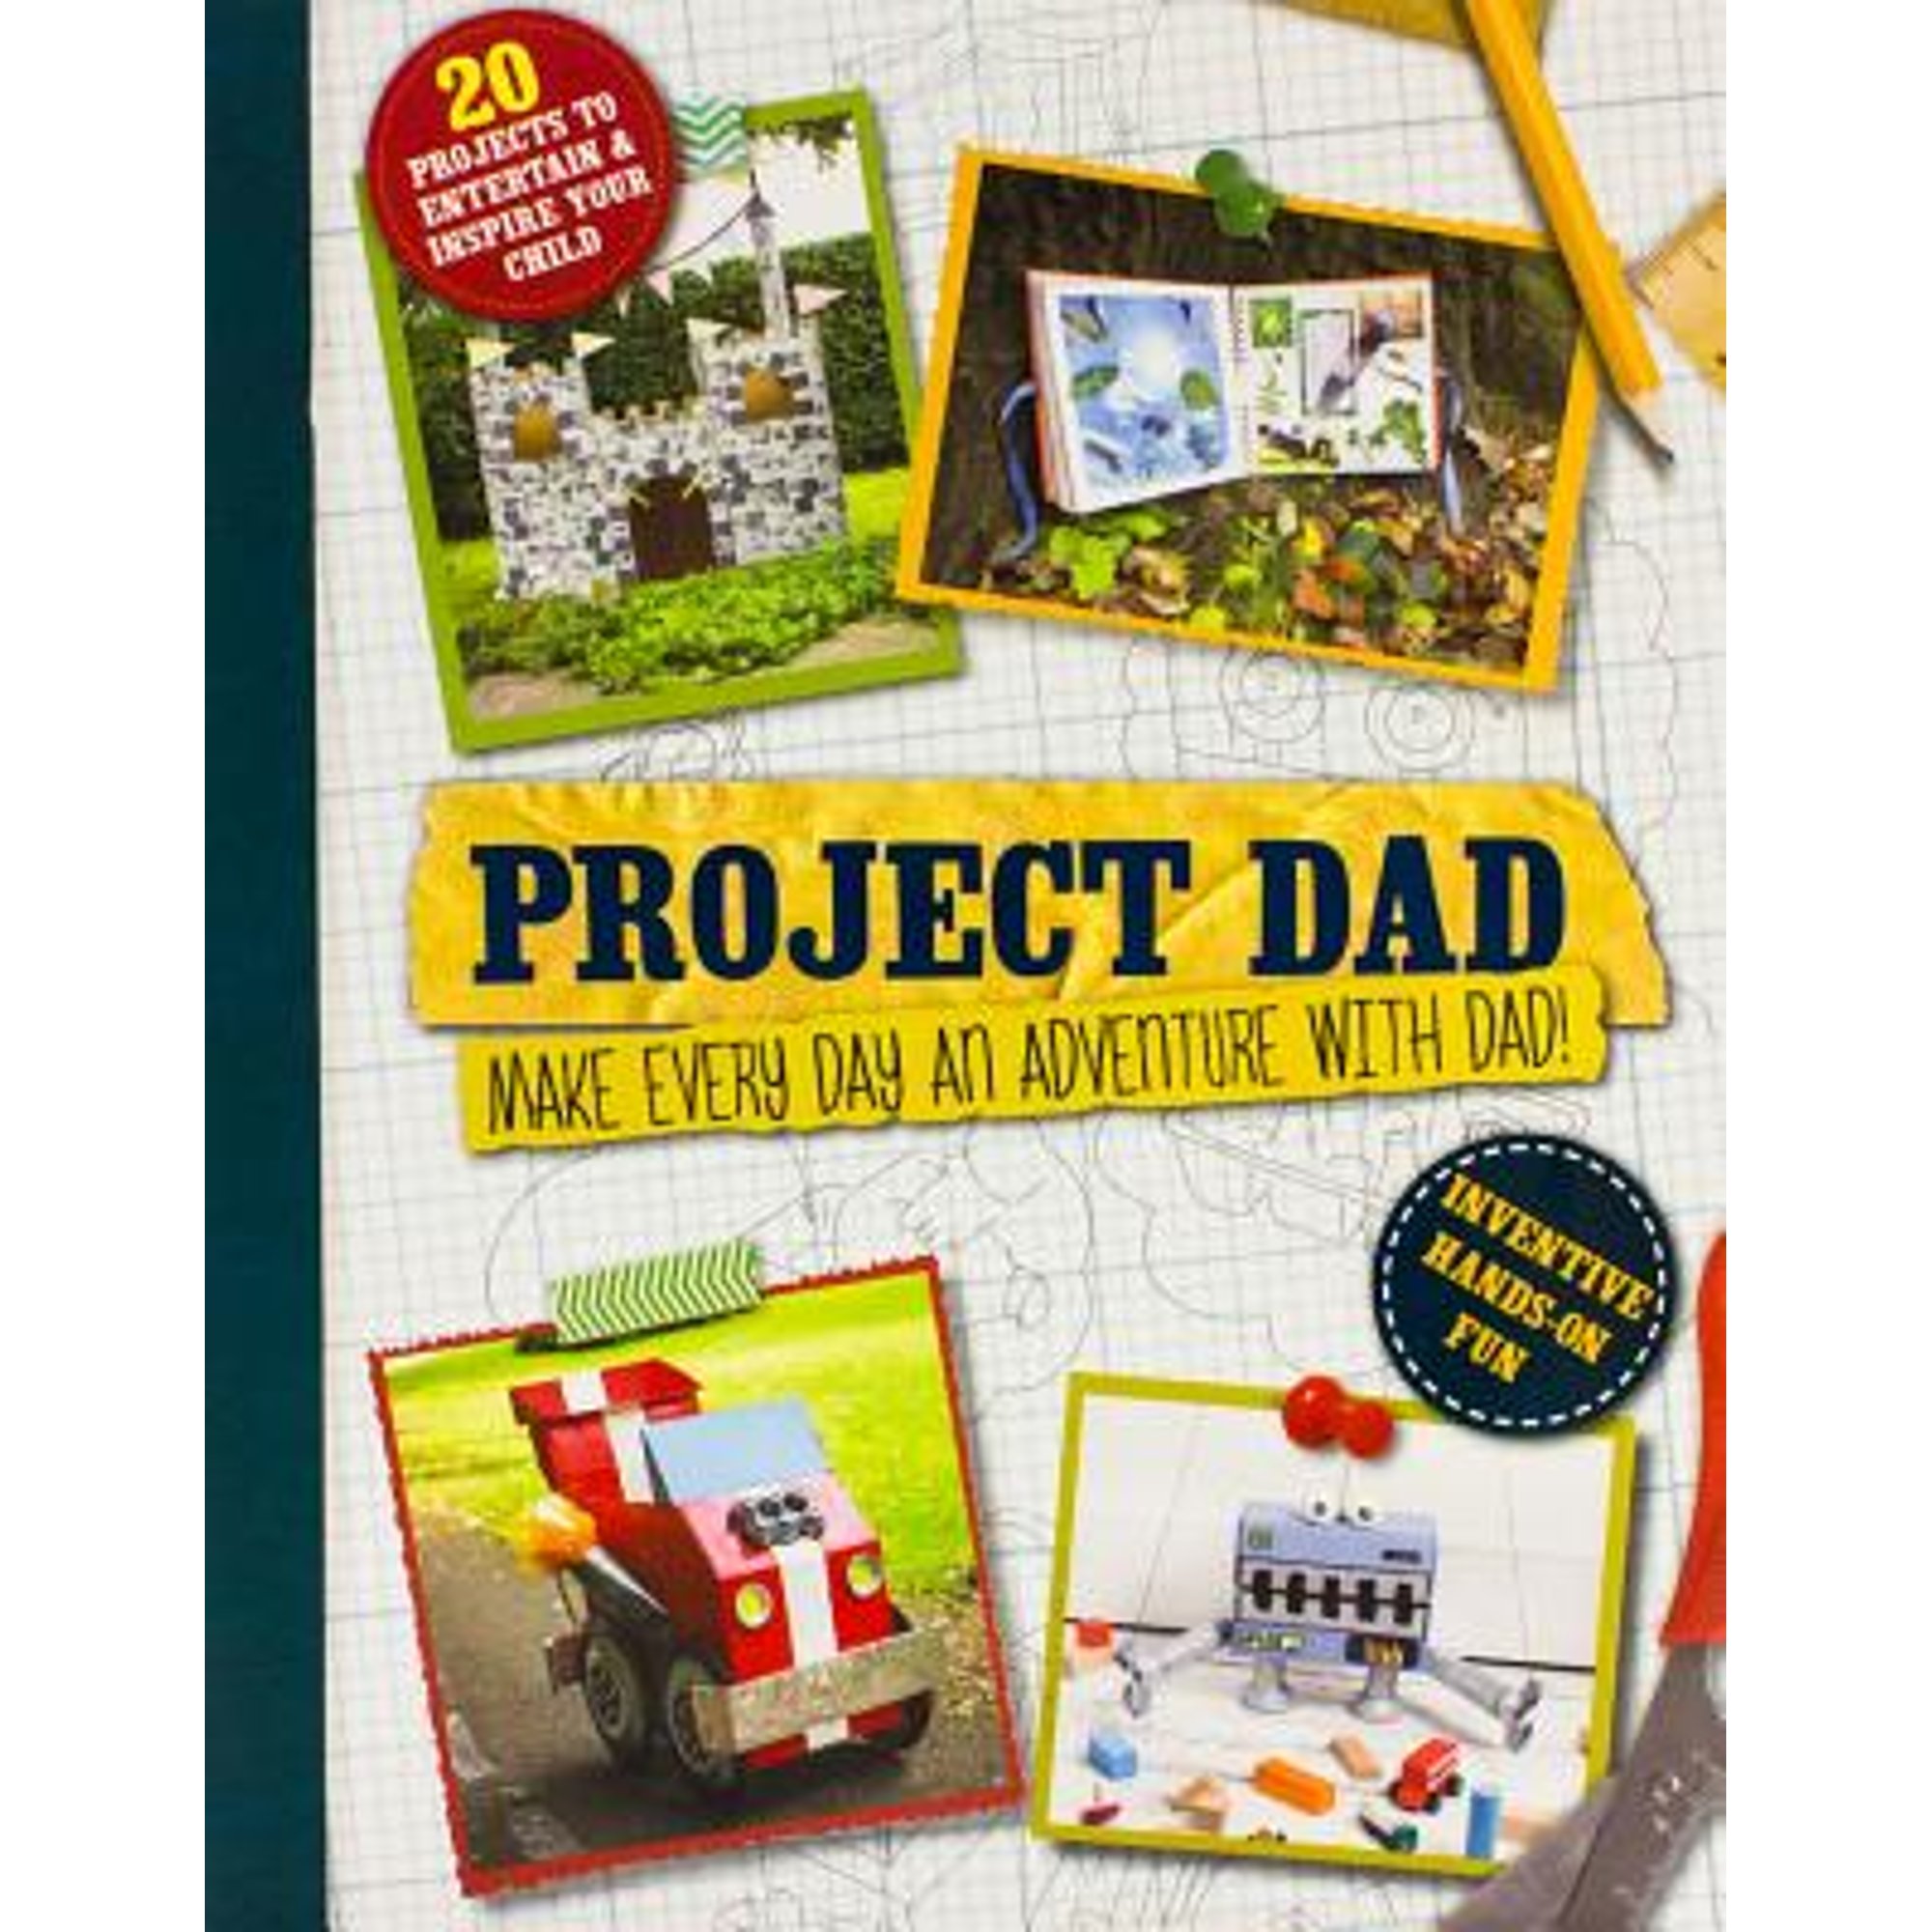 Project Dad : Make Every Day an Adventure with Dad! (Paperback) - image 1 of 1